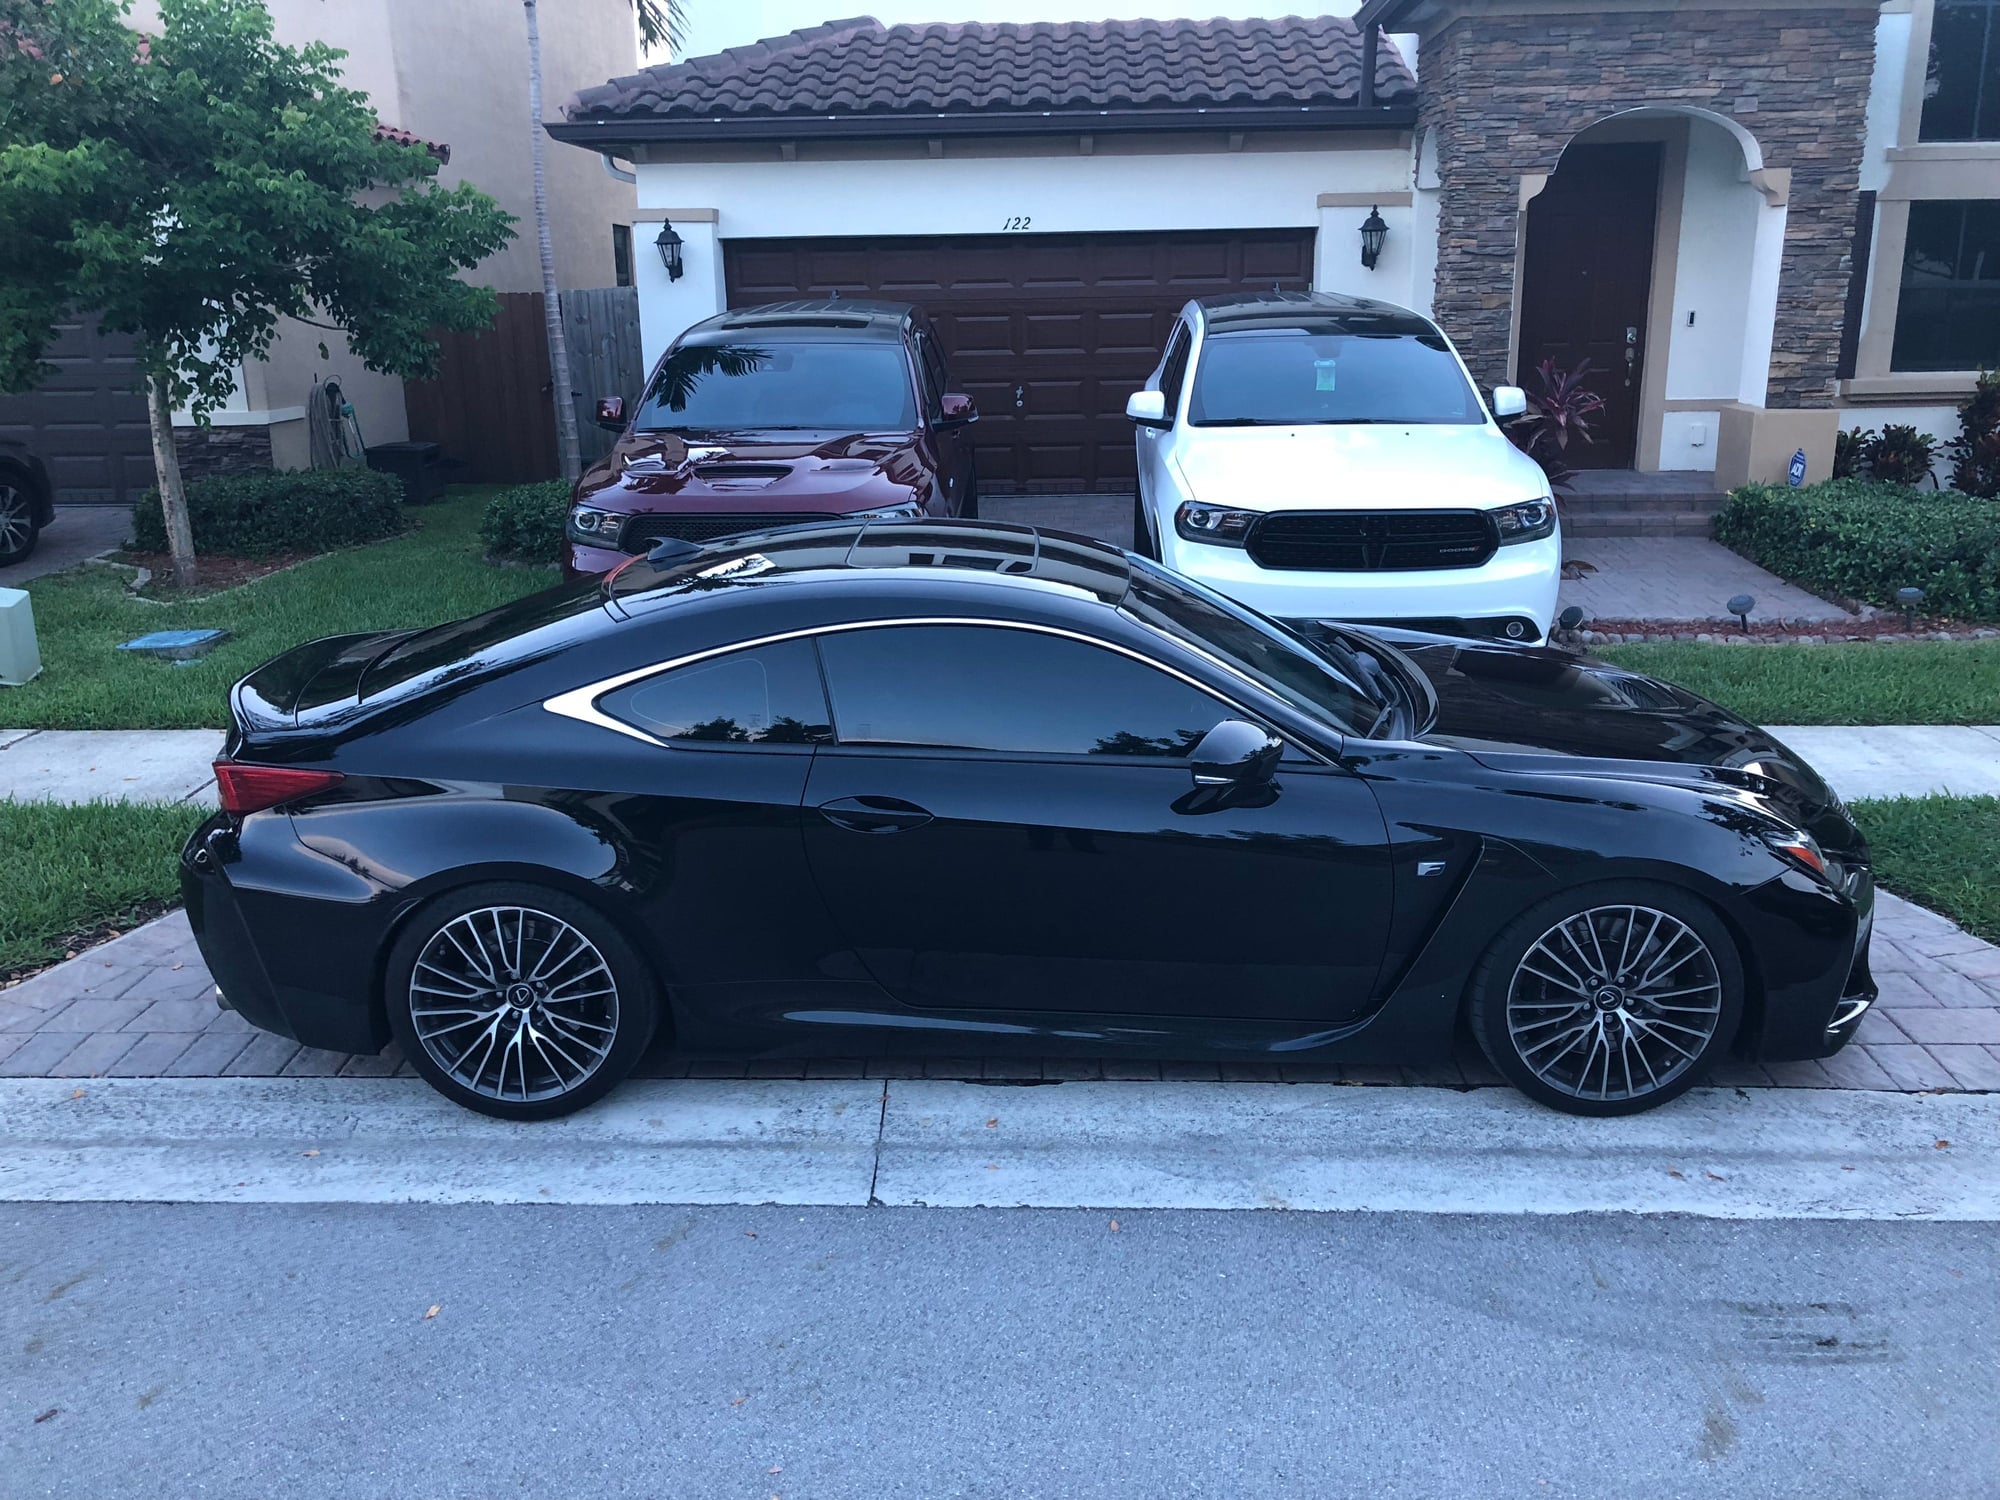 Miscellaneous - Spacers - 20mm Front & 15mm Rear - Used - 2015 to 2019 Lexus RC F - Homestead, FL 33033, United States